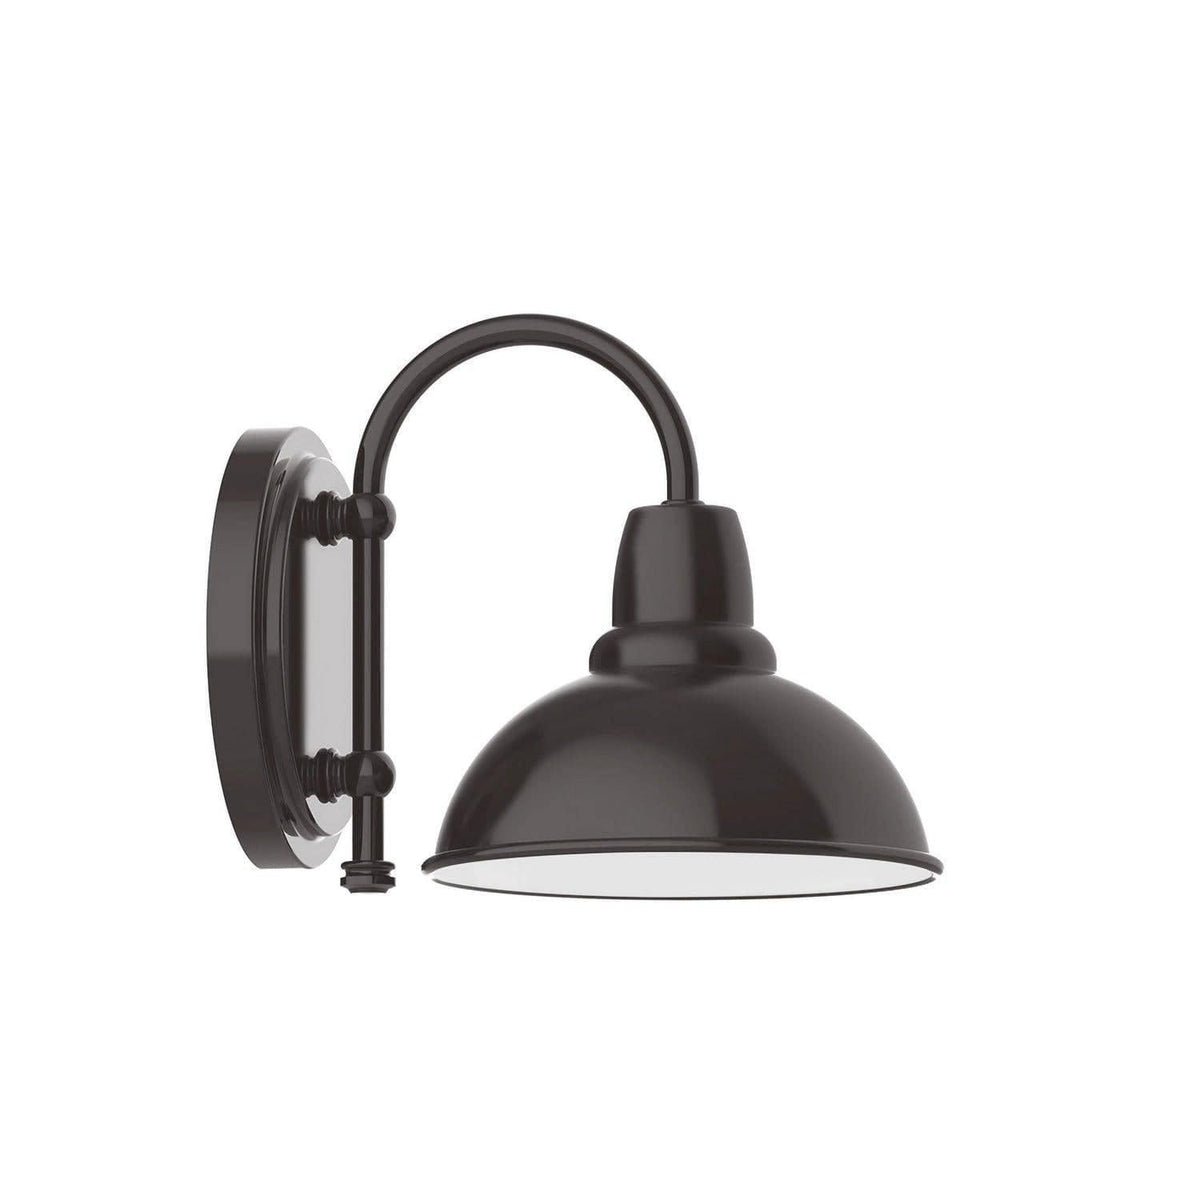 Montclair Light Works - Cafe 8" Wall Sconce - SCB105-51 | Montreal Lighting & Hardware